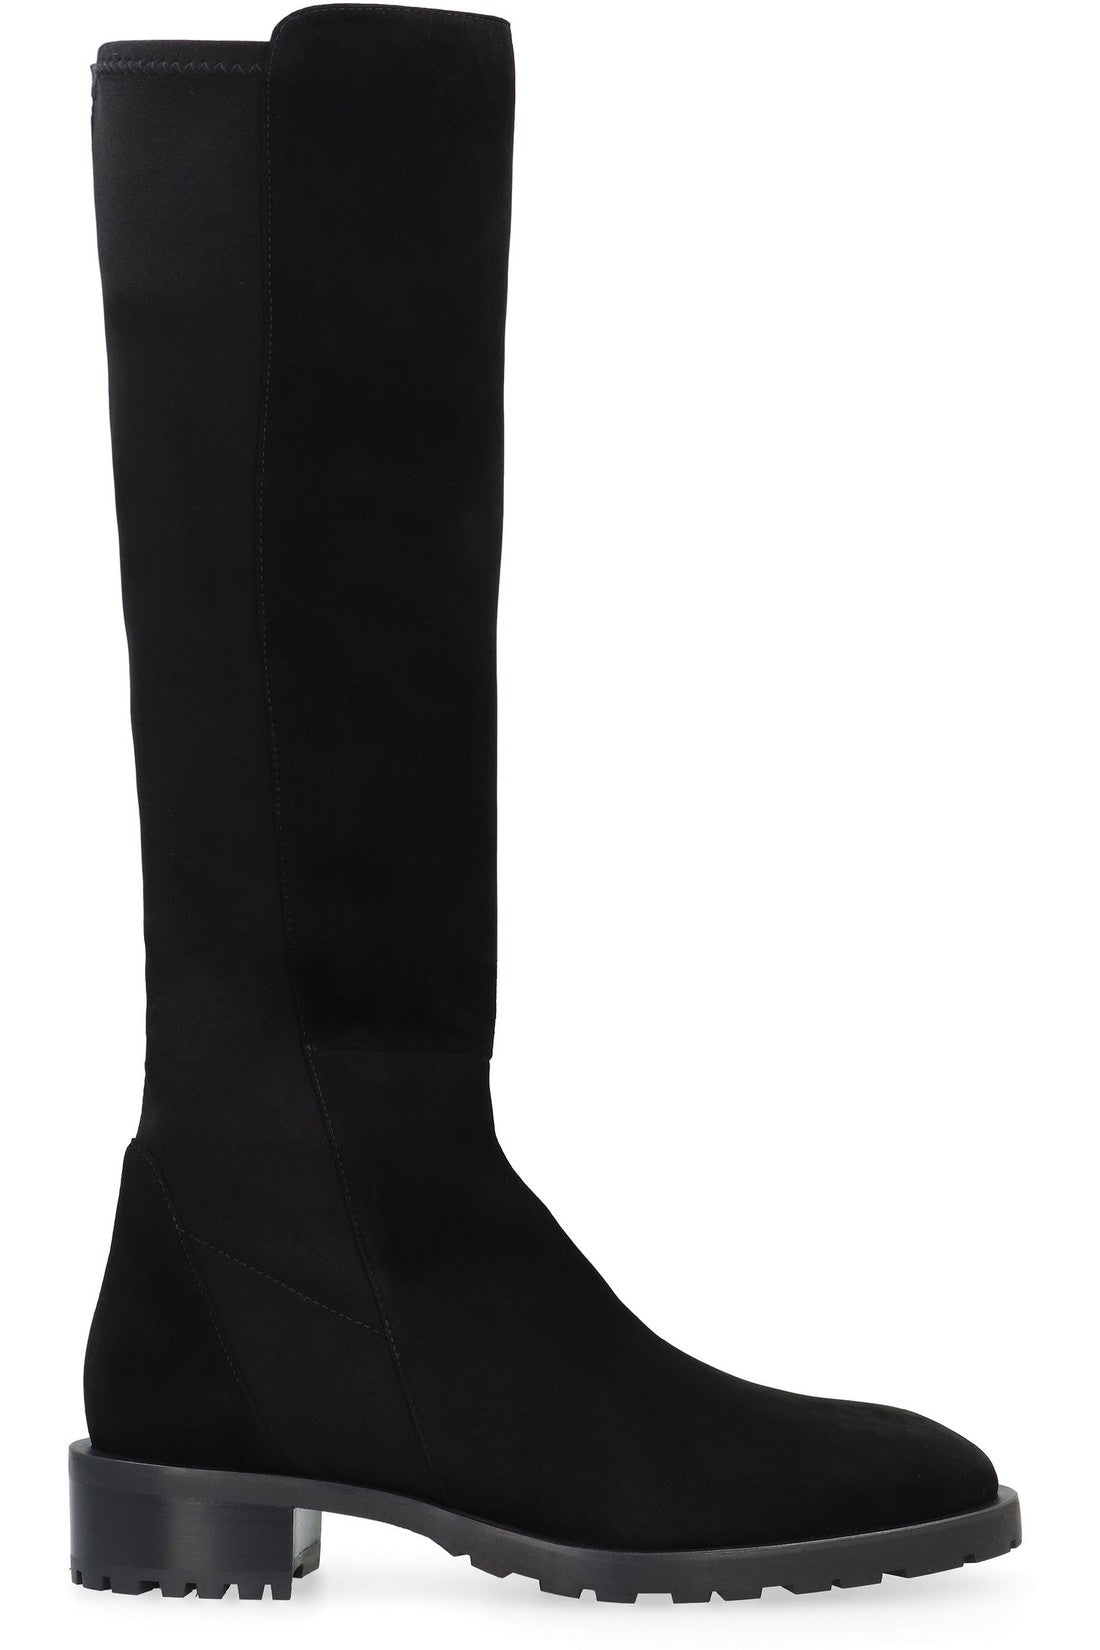 Stuart Weitzman-OUTLET-SALE-5050 leather and stretch fabric boots-ARCHIVIST